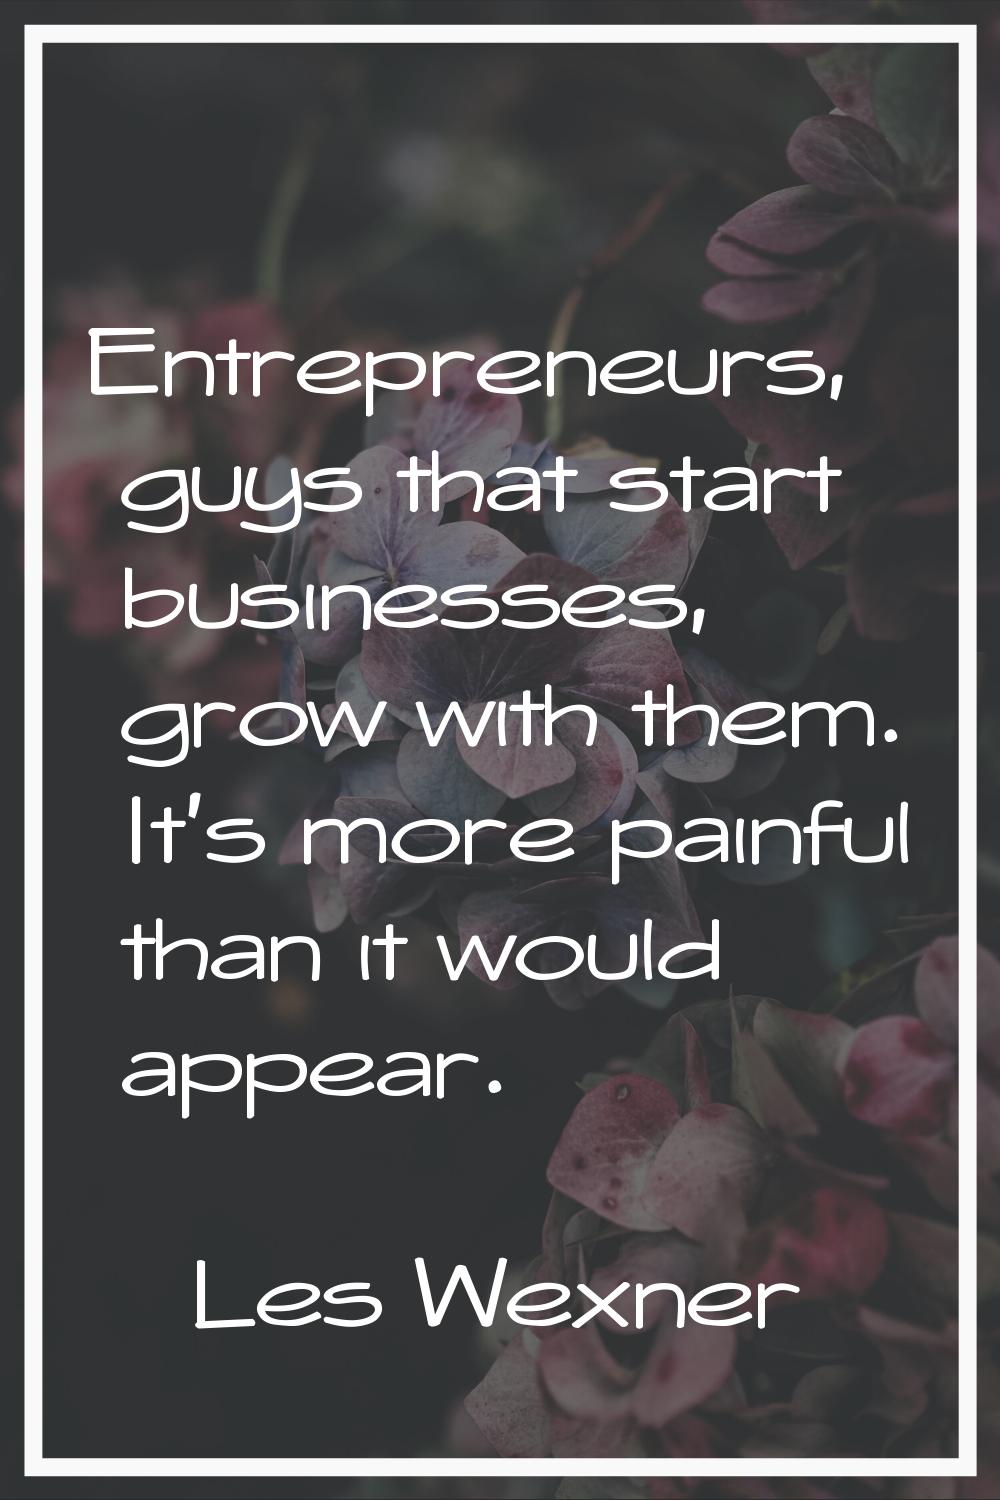 Entrepreneurs, guys that start businesses, grow with them. It's more painful than it would appear.